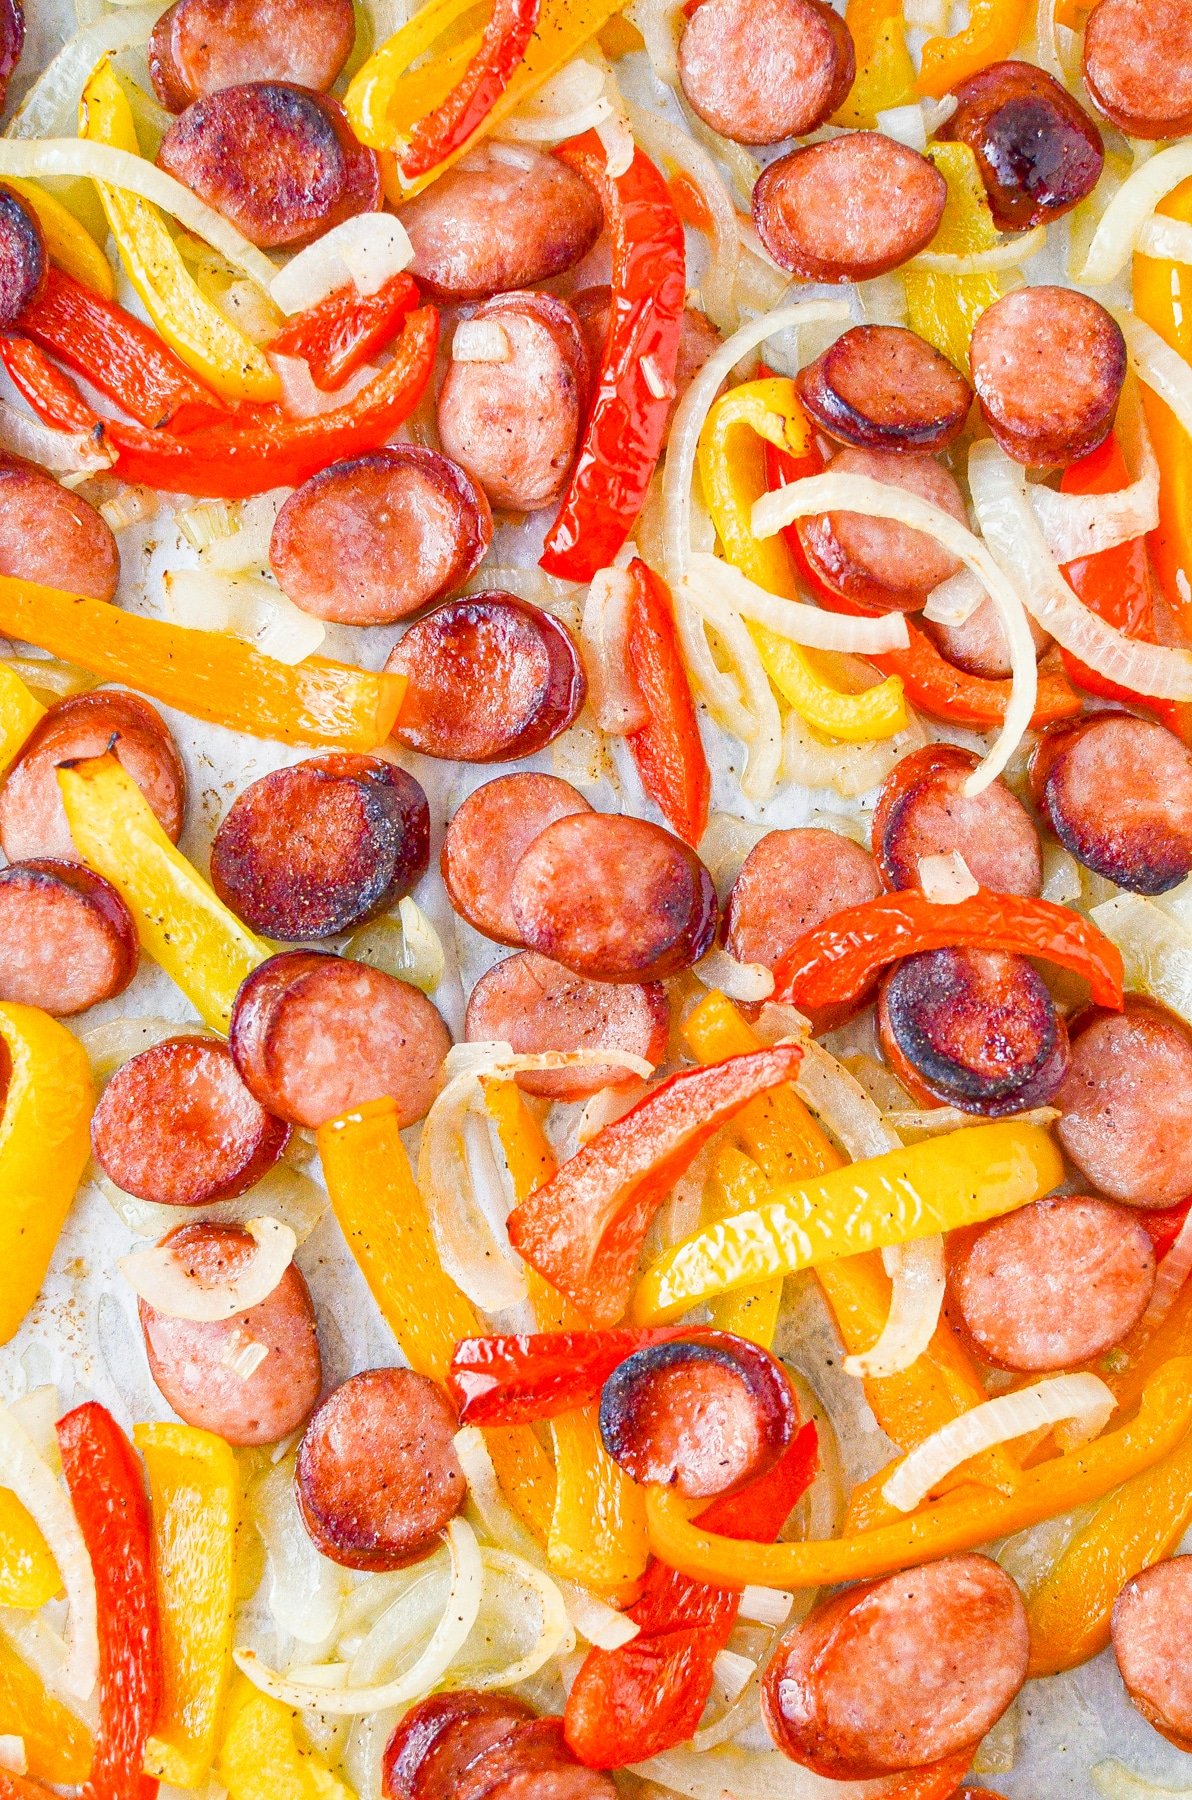 Sausage rounds, peppers, and onions on a sheet pan.